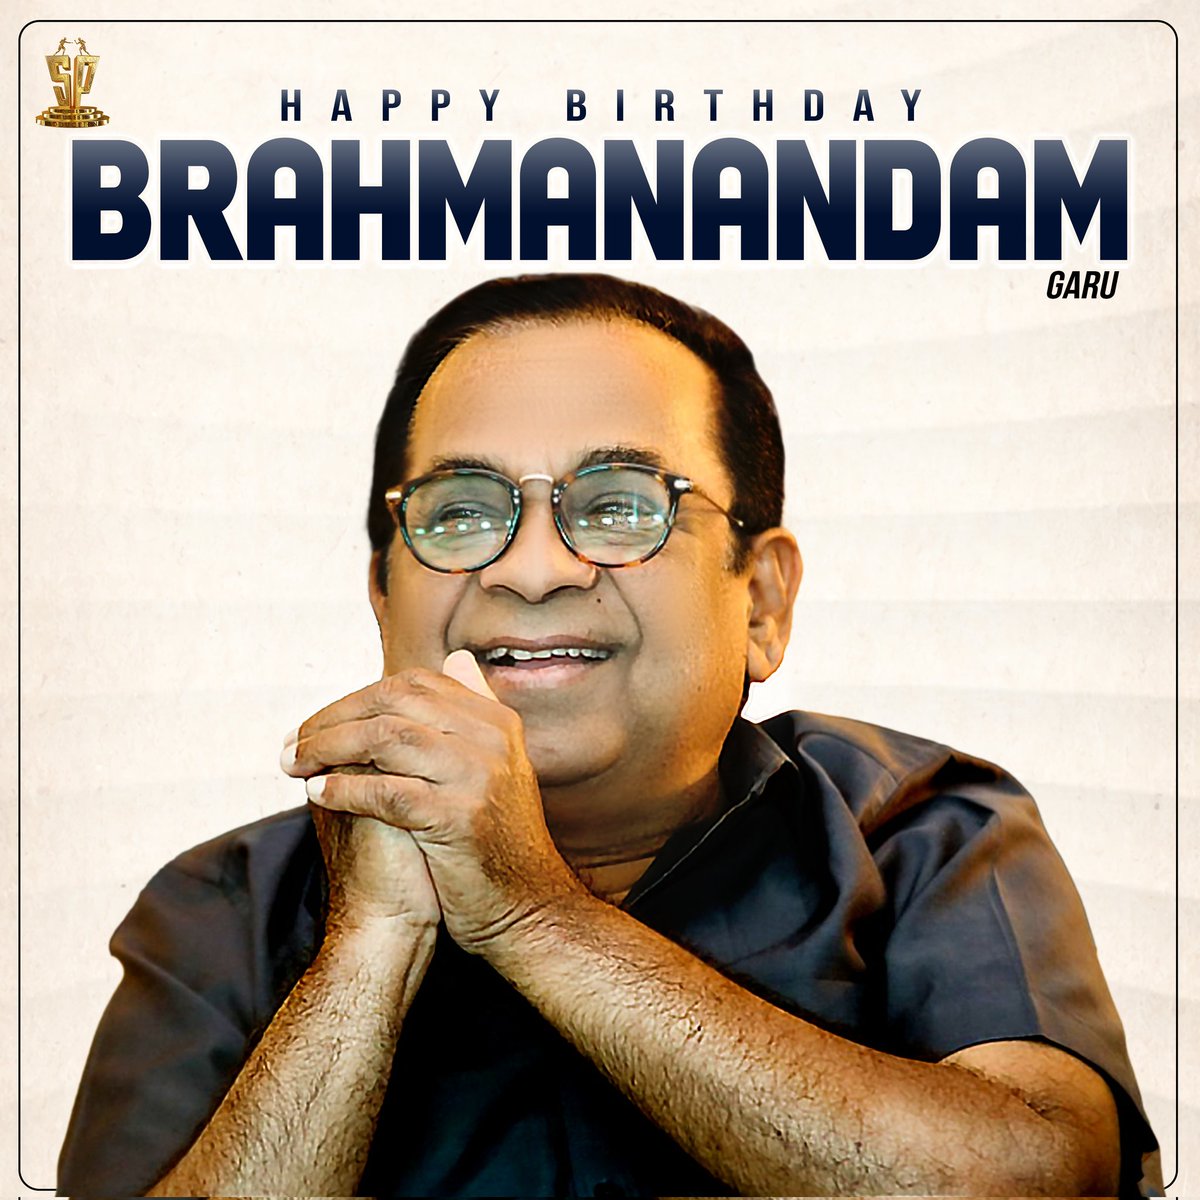 Happy birthday to the adored and esteemed actor, #Brahmanandam garu! 🎉 May the upcoming year bring him abundant laughter and excellent health! ❤️#HBDBrahmanandam